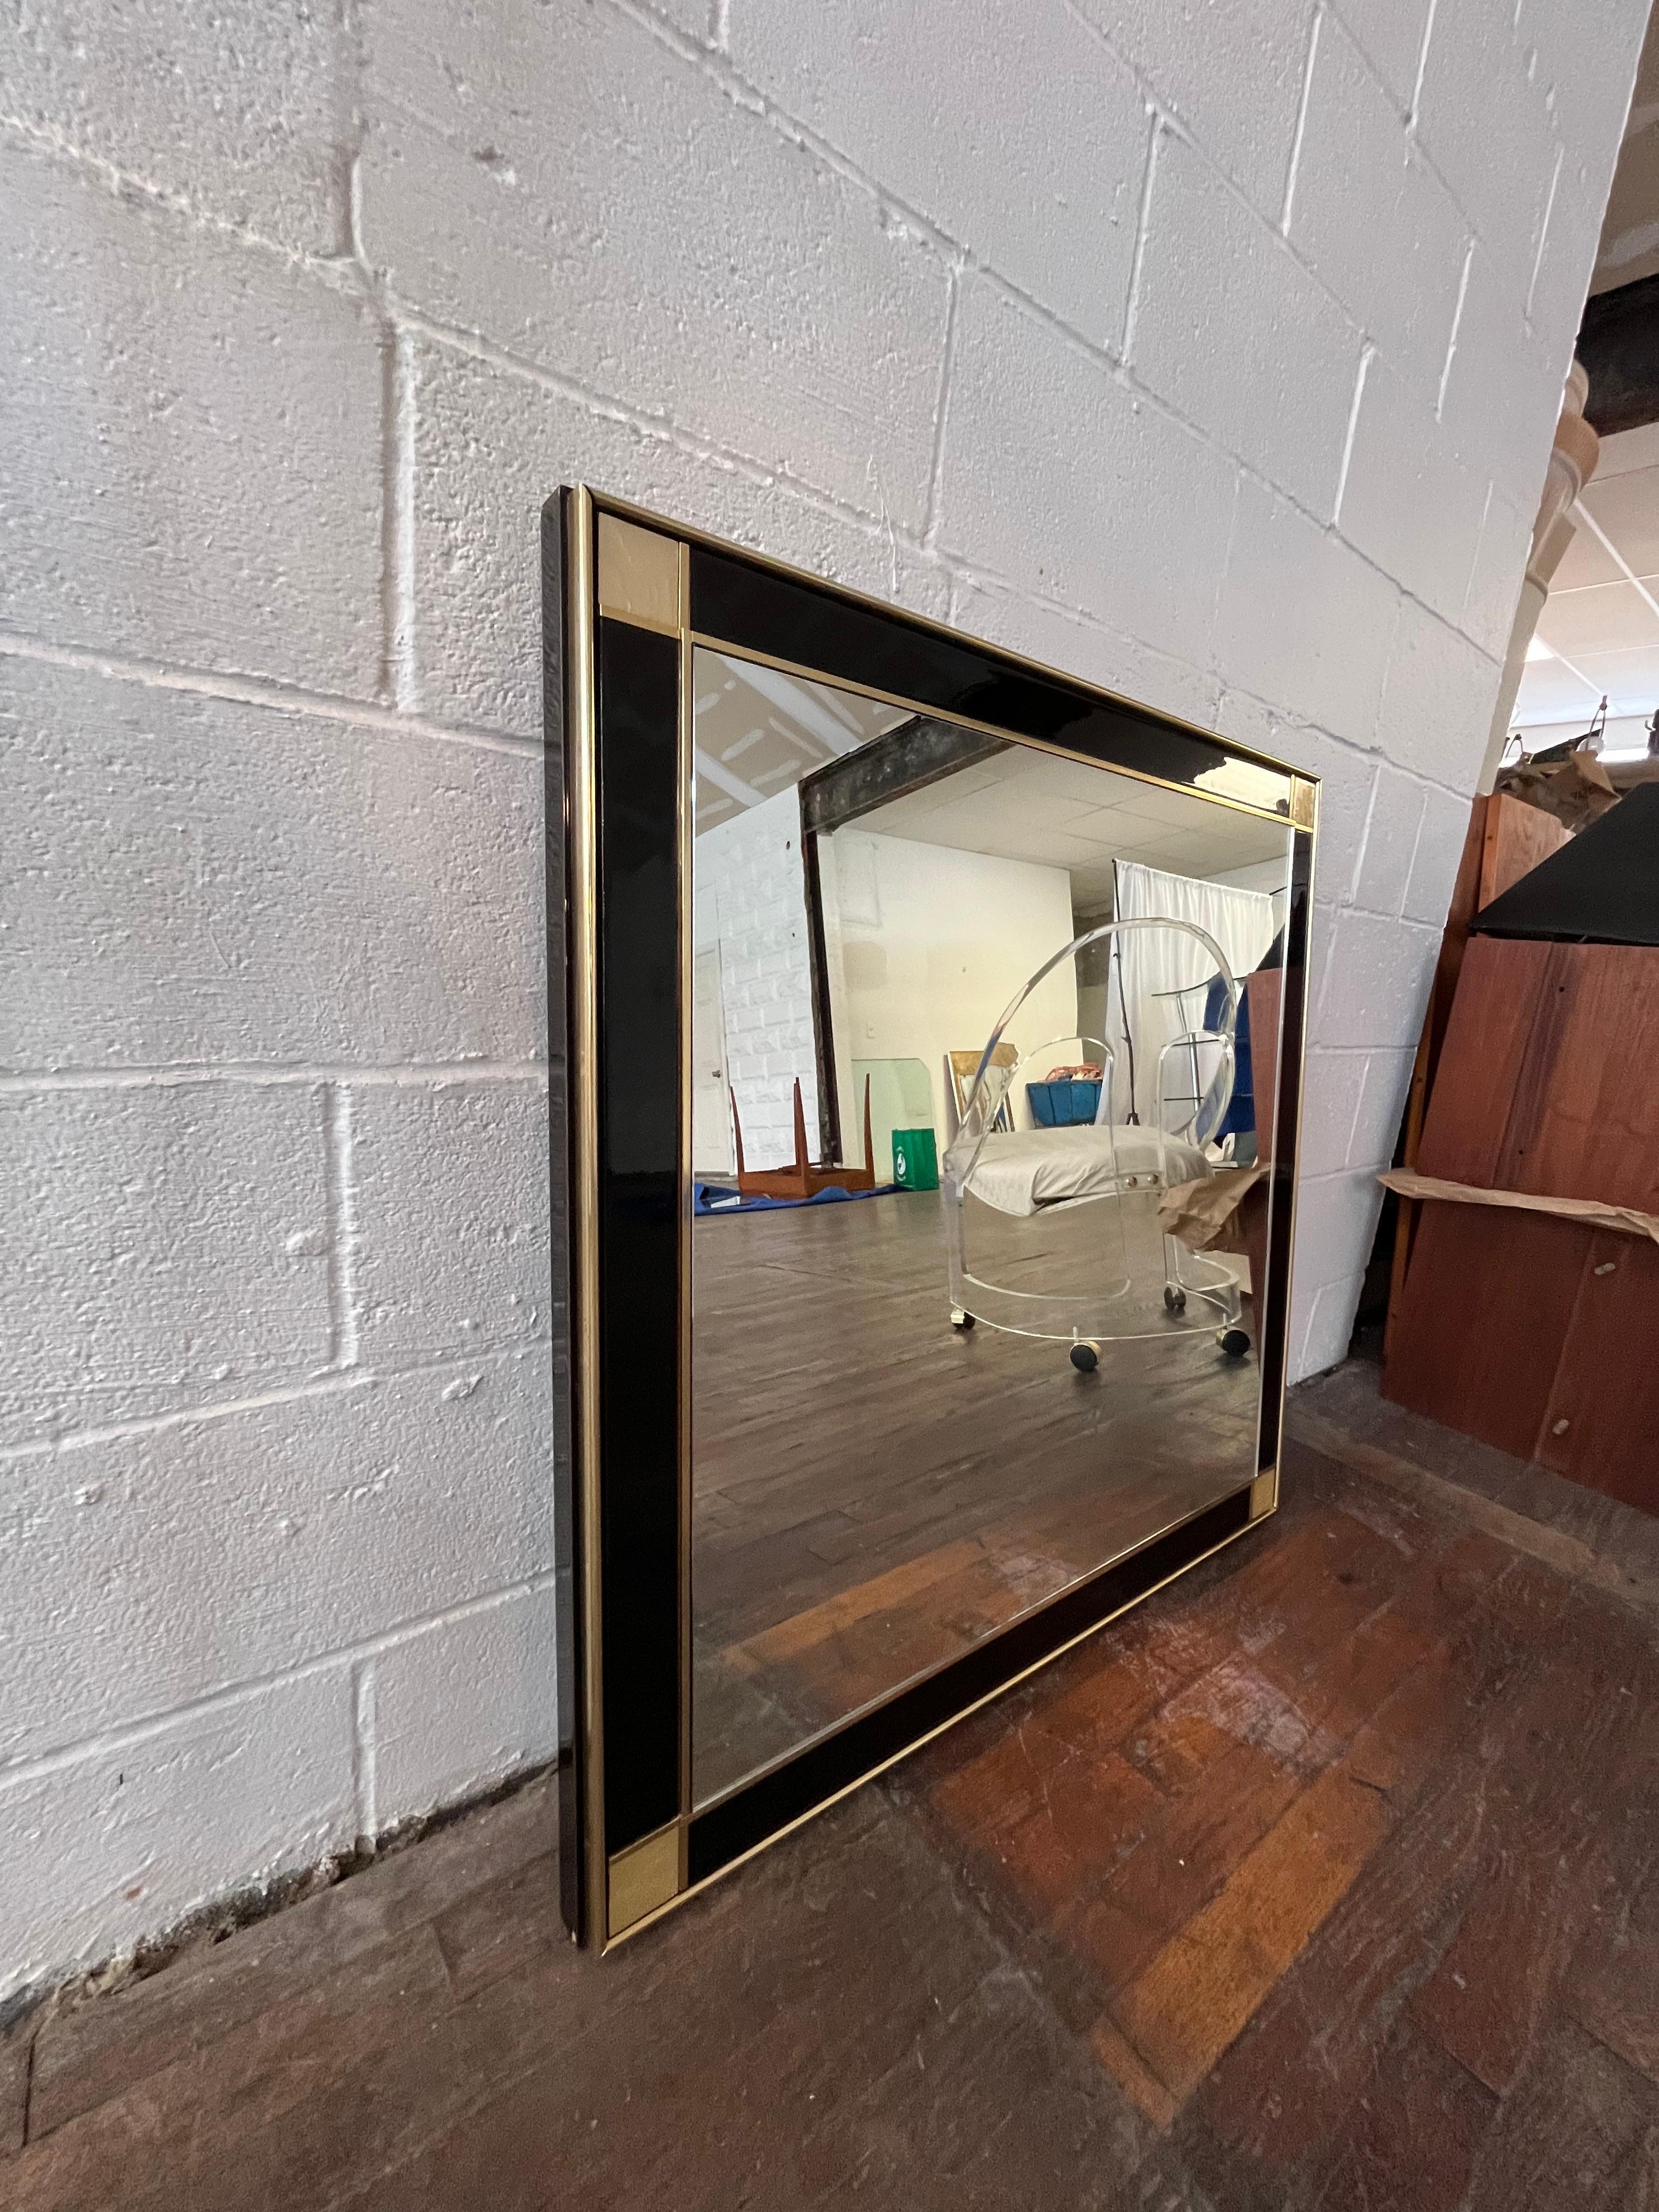 French black Lacquered mirror by Pierre Cardin. Manufactured by Roche Bobois. This piece features gilt brass trim throughout. The strong craftsmanship combined with the elegant lines add a sleek touch.
Curbside to NYC/Philly $350